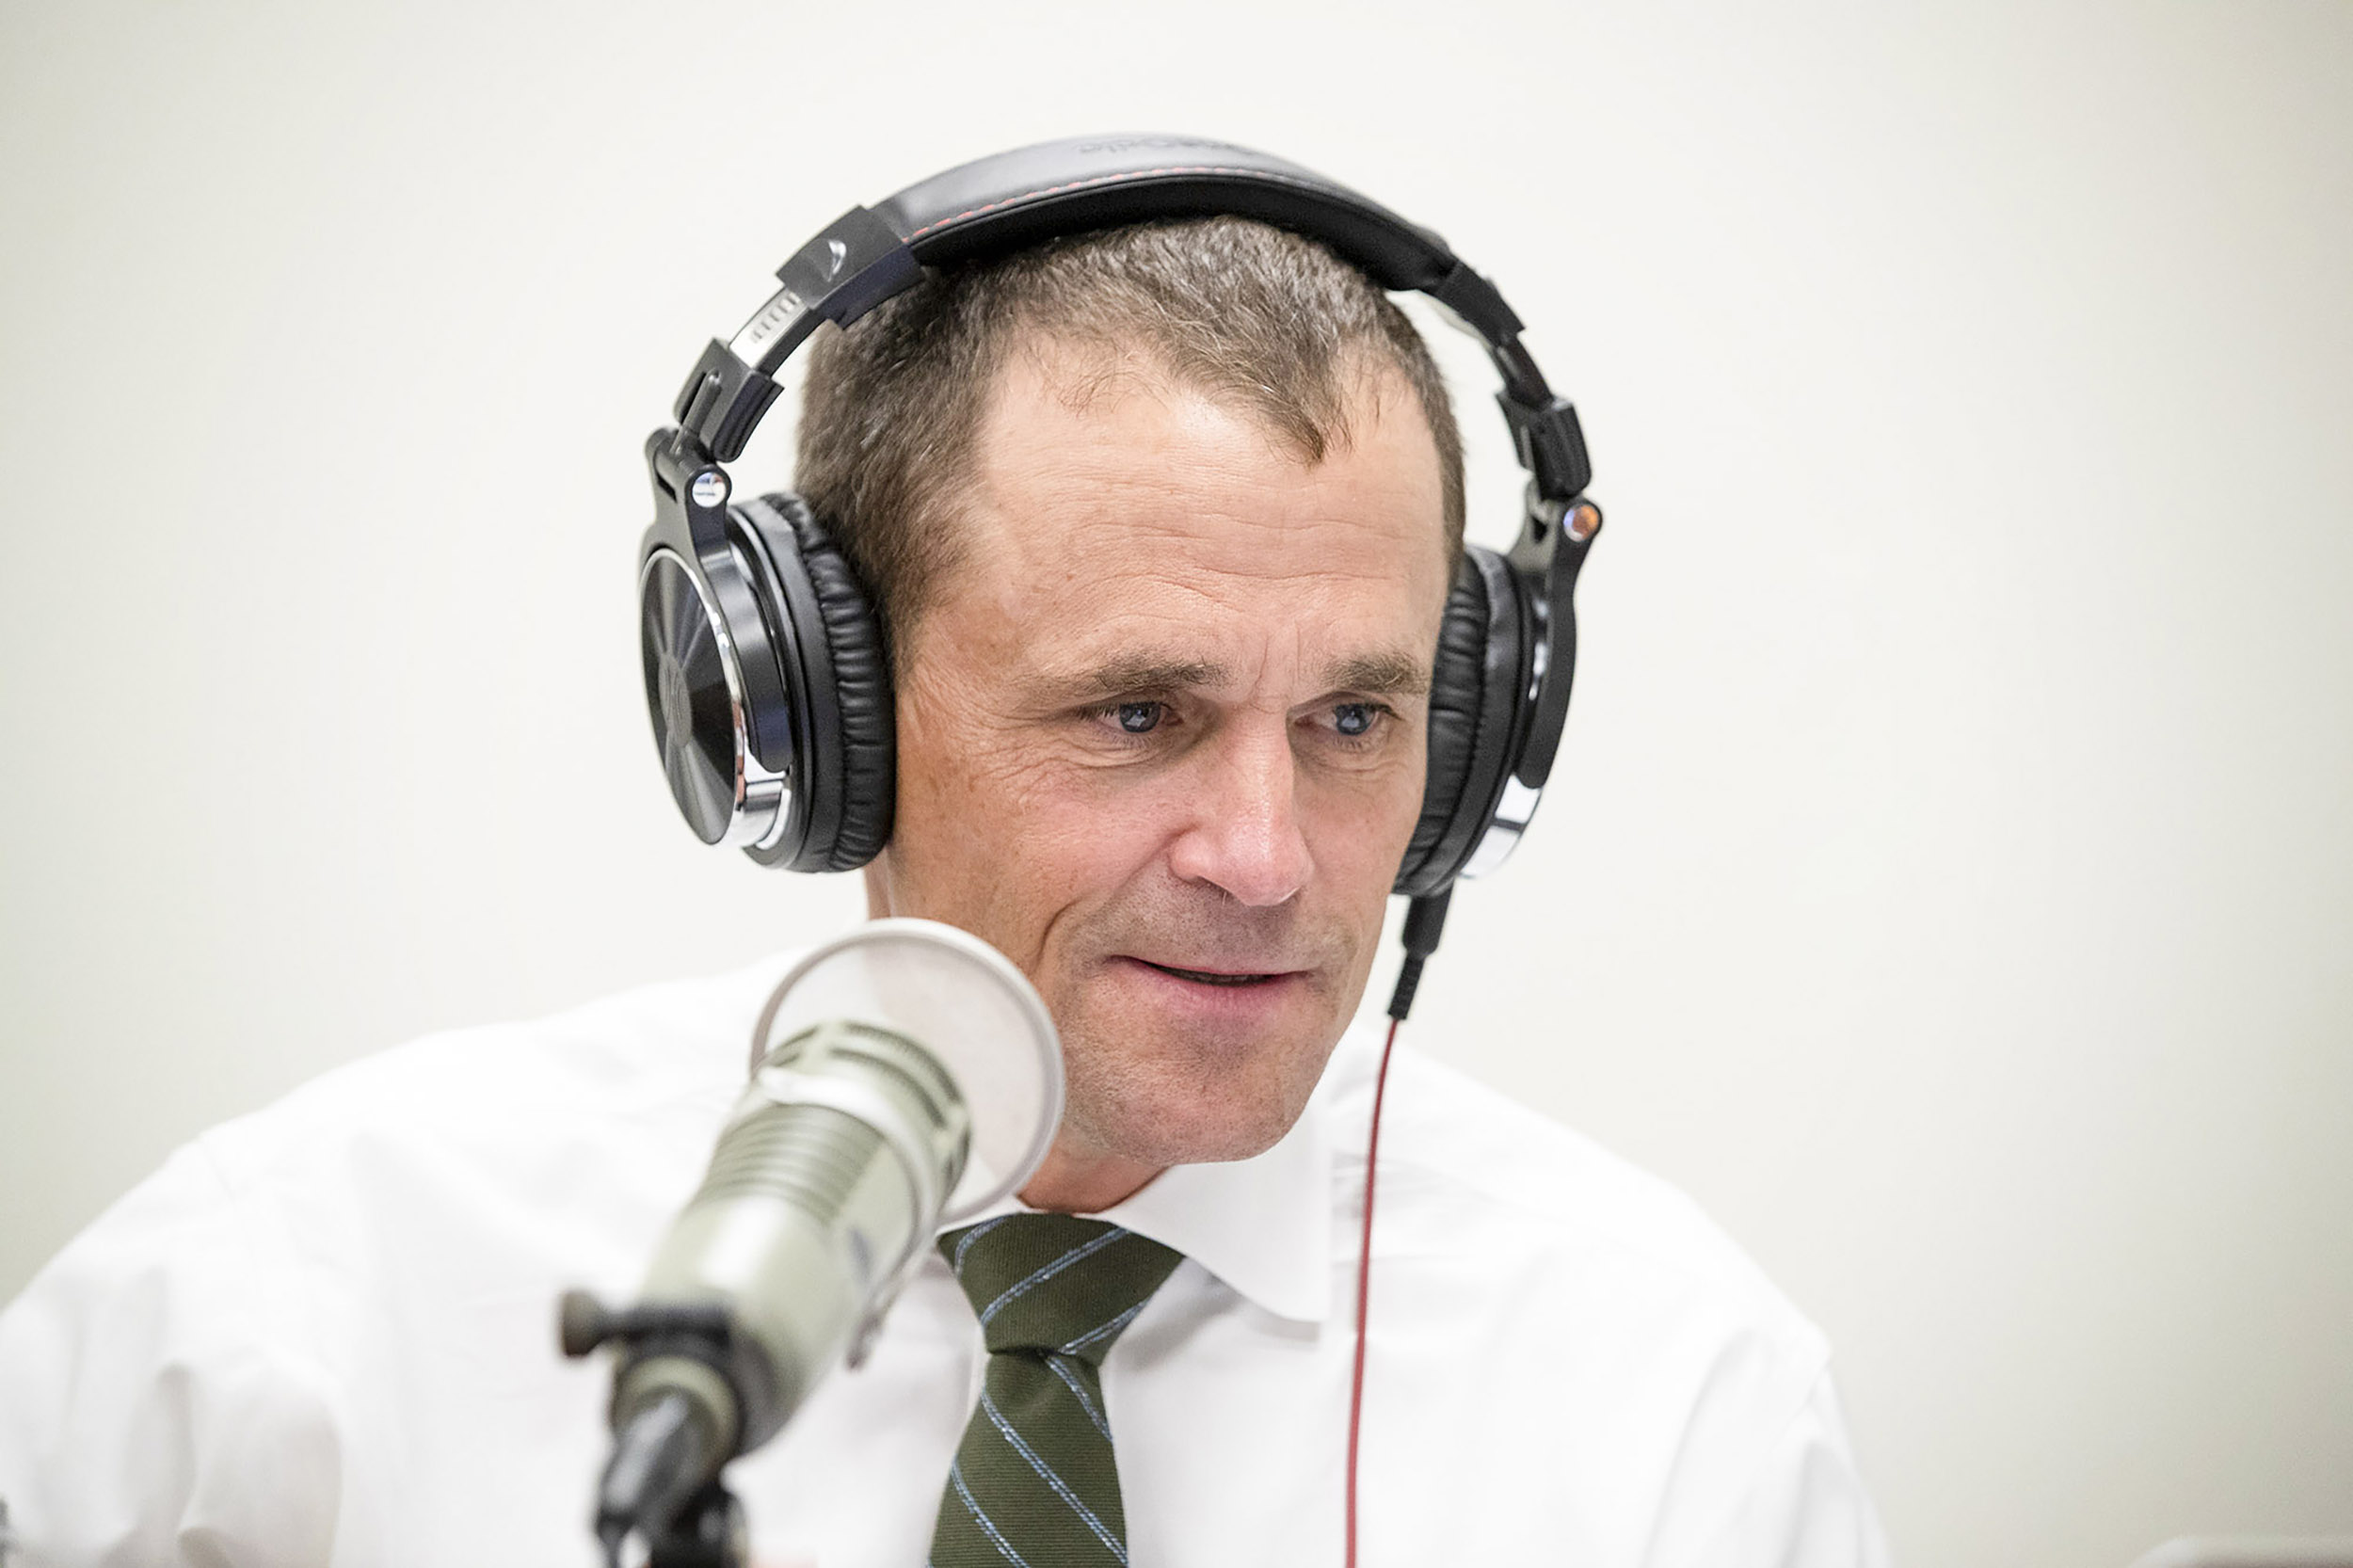 President Ryan wearing Headphones in front of a microphone recording his podcast